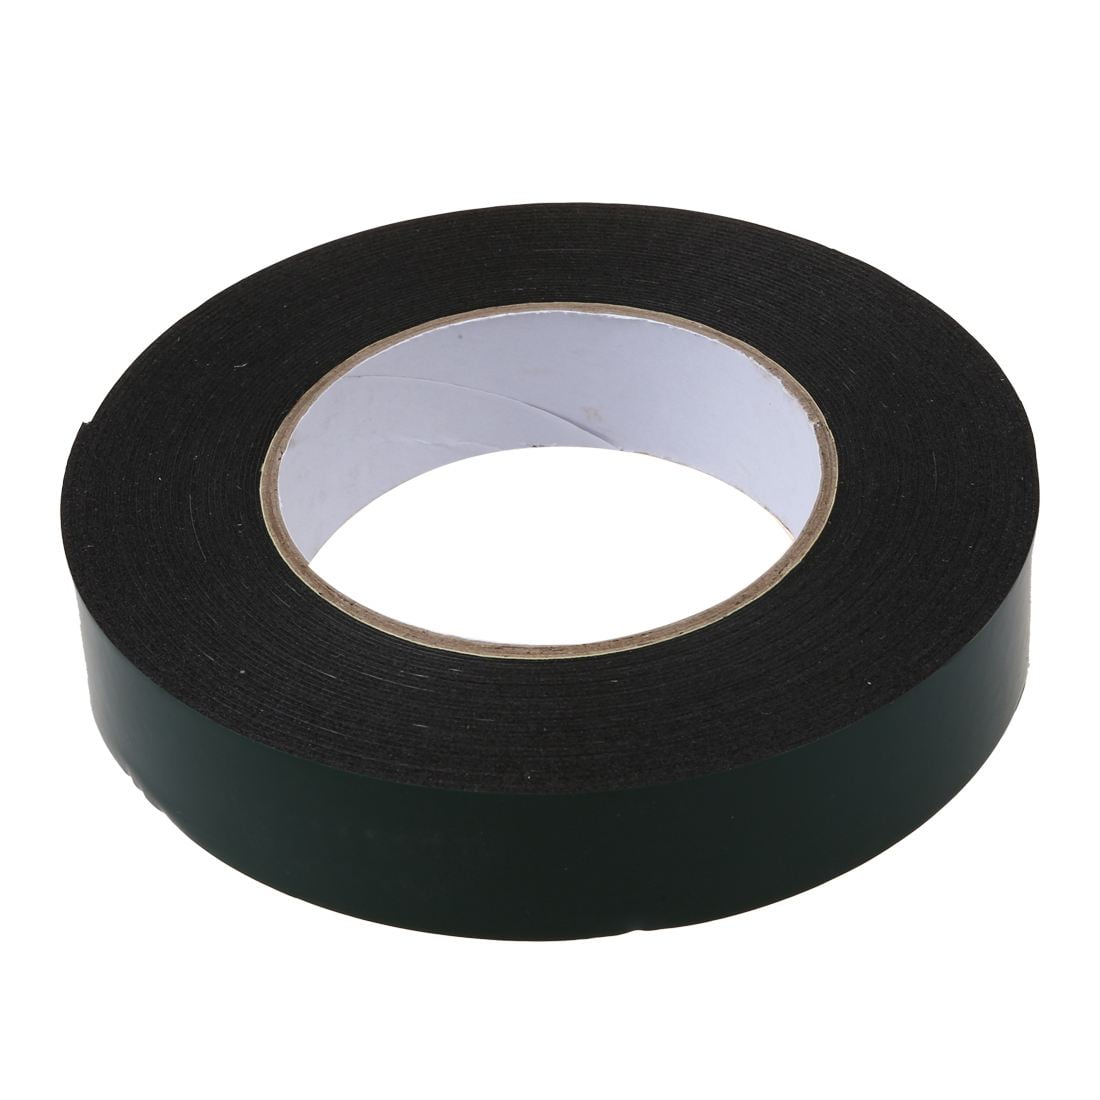 Plate Super Strong Waterproof Black Adhesive Double Sided Foam Tape Trim Car 